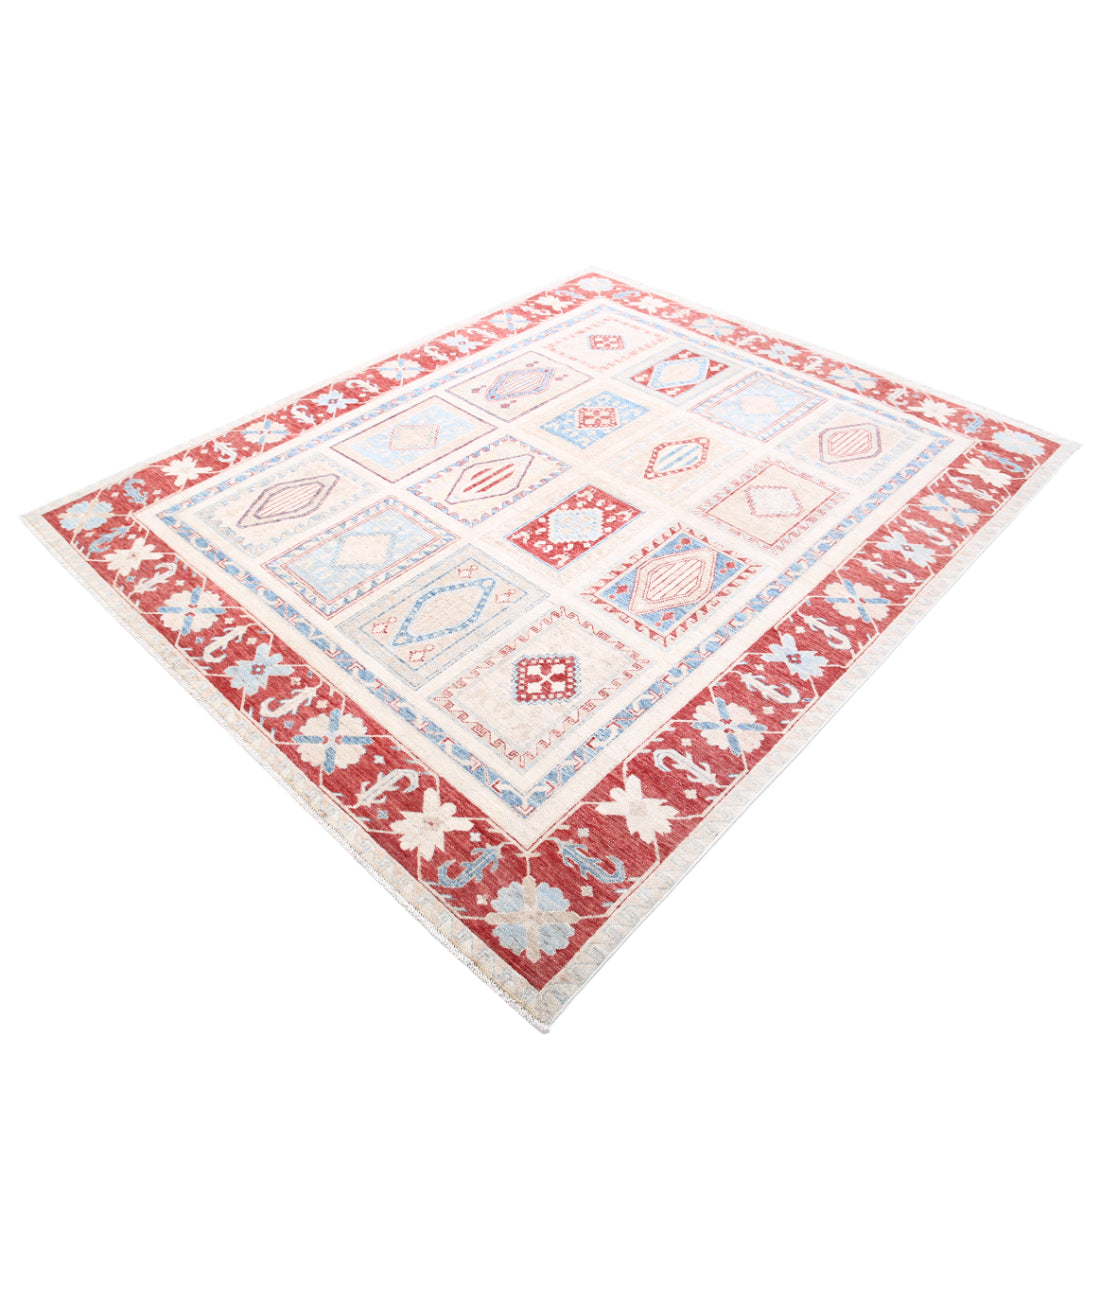 Hand Knotted Bakhtiari Wool Rug - 6'6'' x 7'10'' 6'6'' x 7'10'' (195 X 235) / Ivory / Red